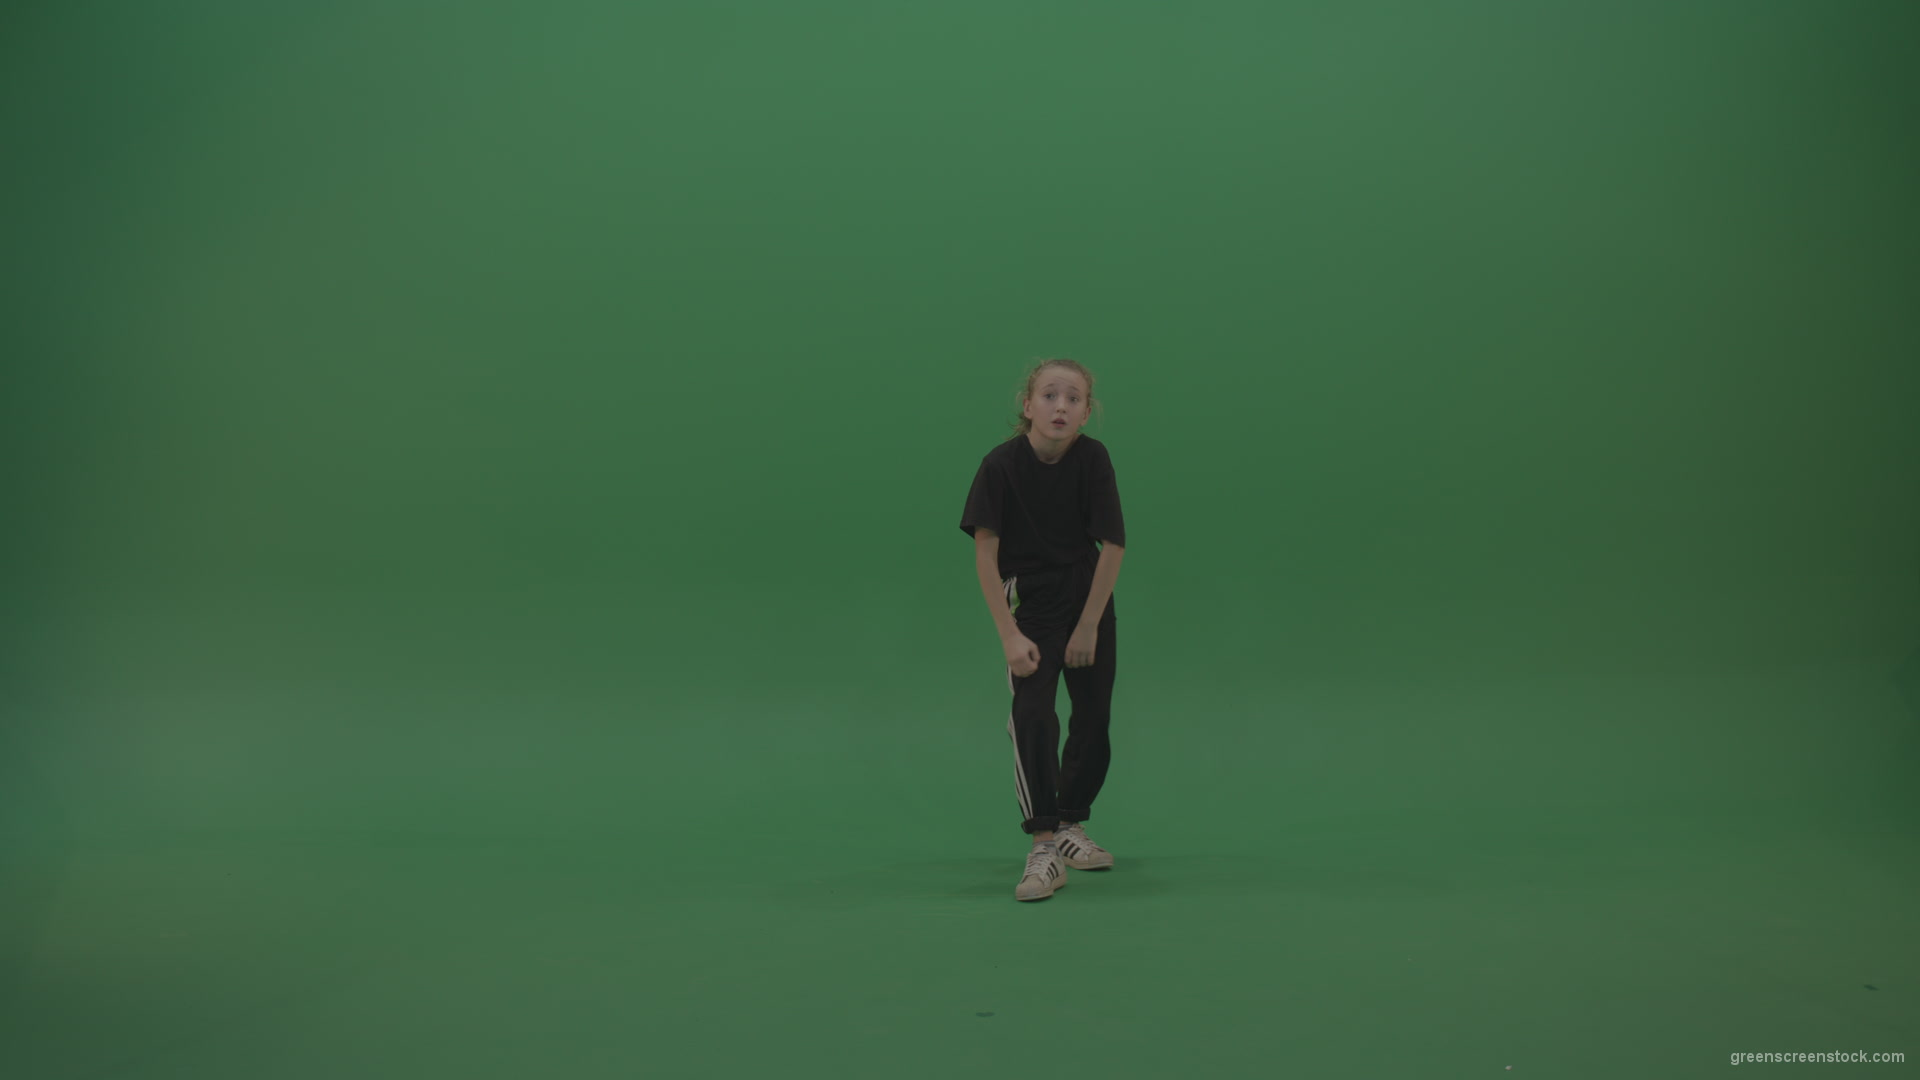 Incredible_Dance_Hip_Hop_Moves_From_Young_SmalKid_Female_Wearing_Black_Sweat_Suite_And_White_Trainers_On_Green_Screen_Wall_Background_009 Green Screen Stock